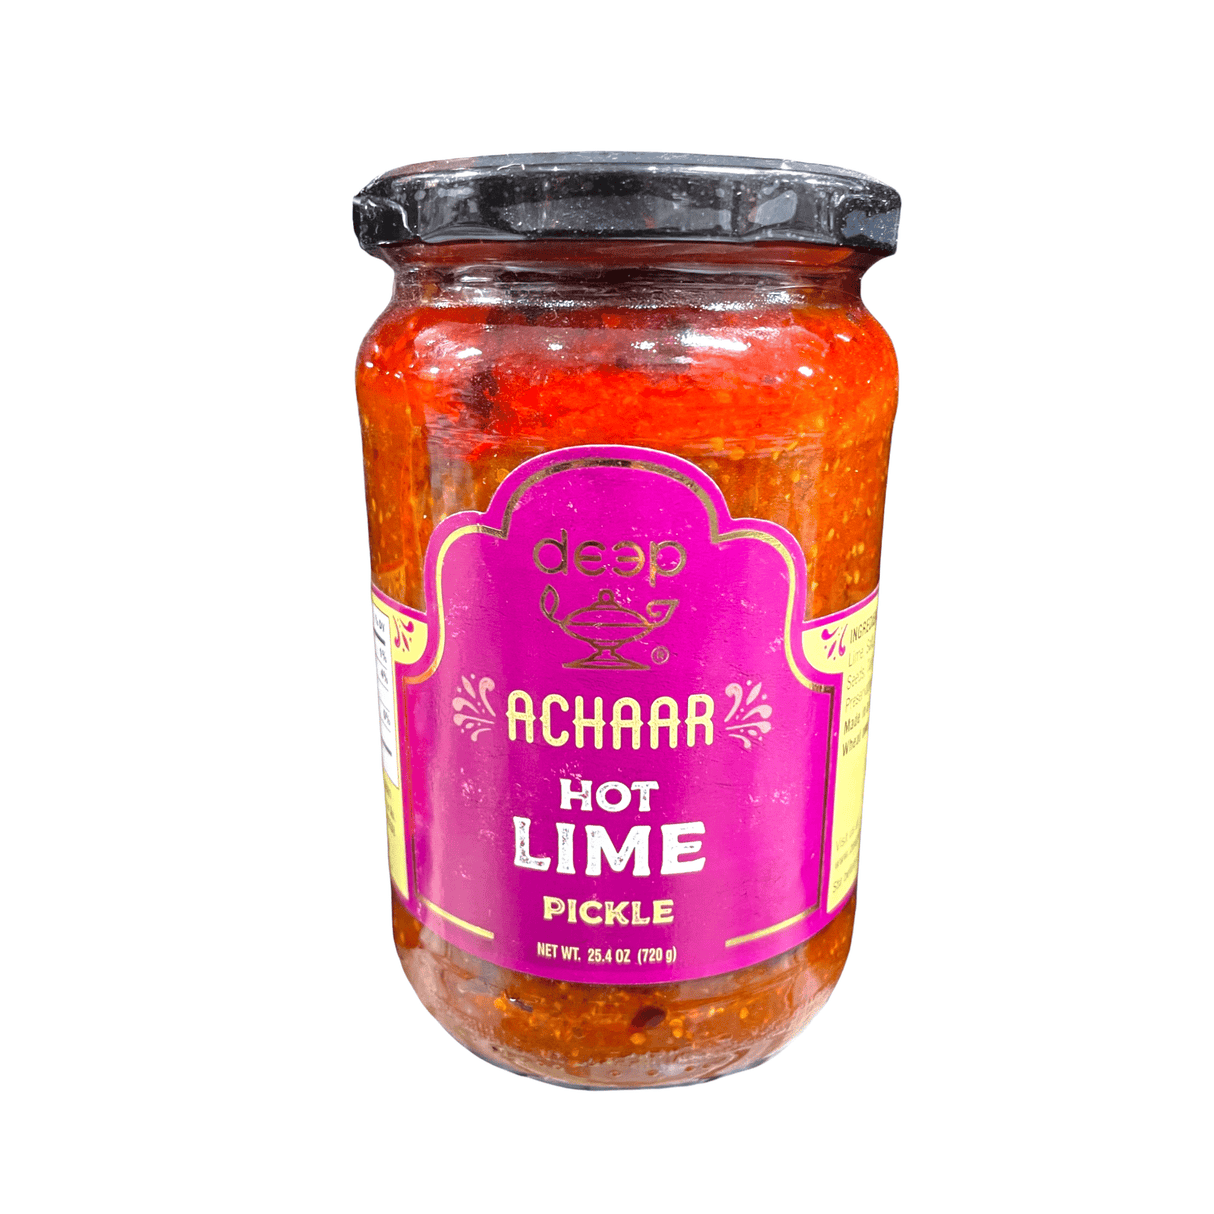 Deep Hot Lime Pickle